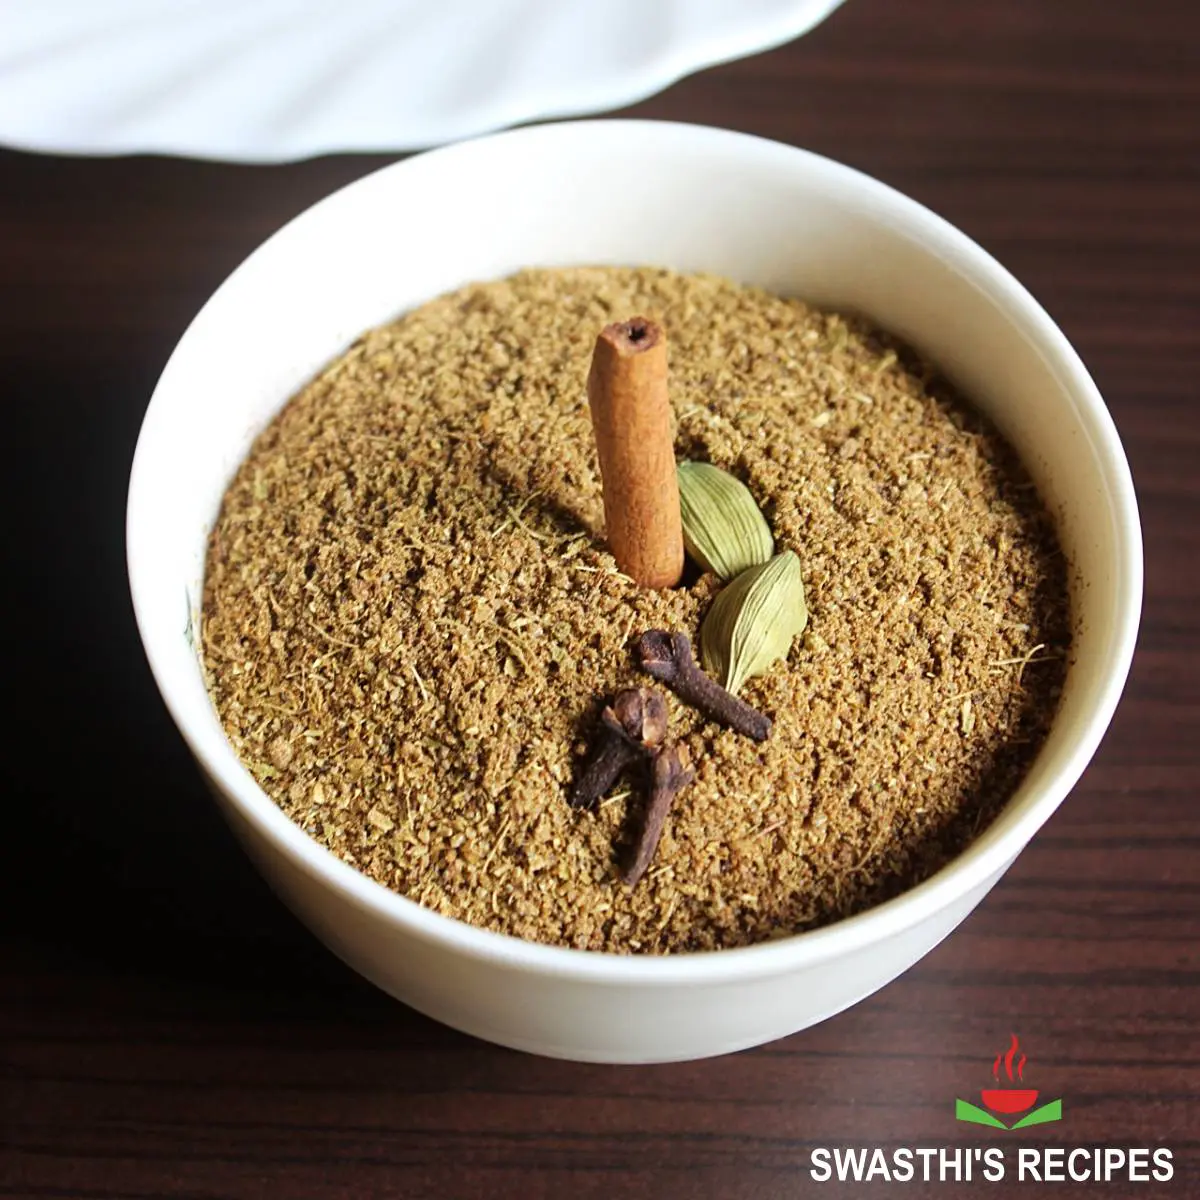 Garam masala recipe made with aromatic spices like cumin, cloves and many others